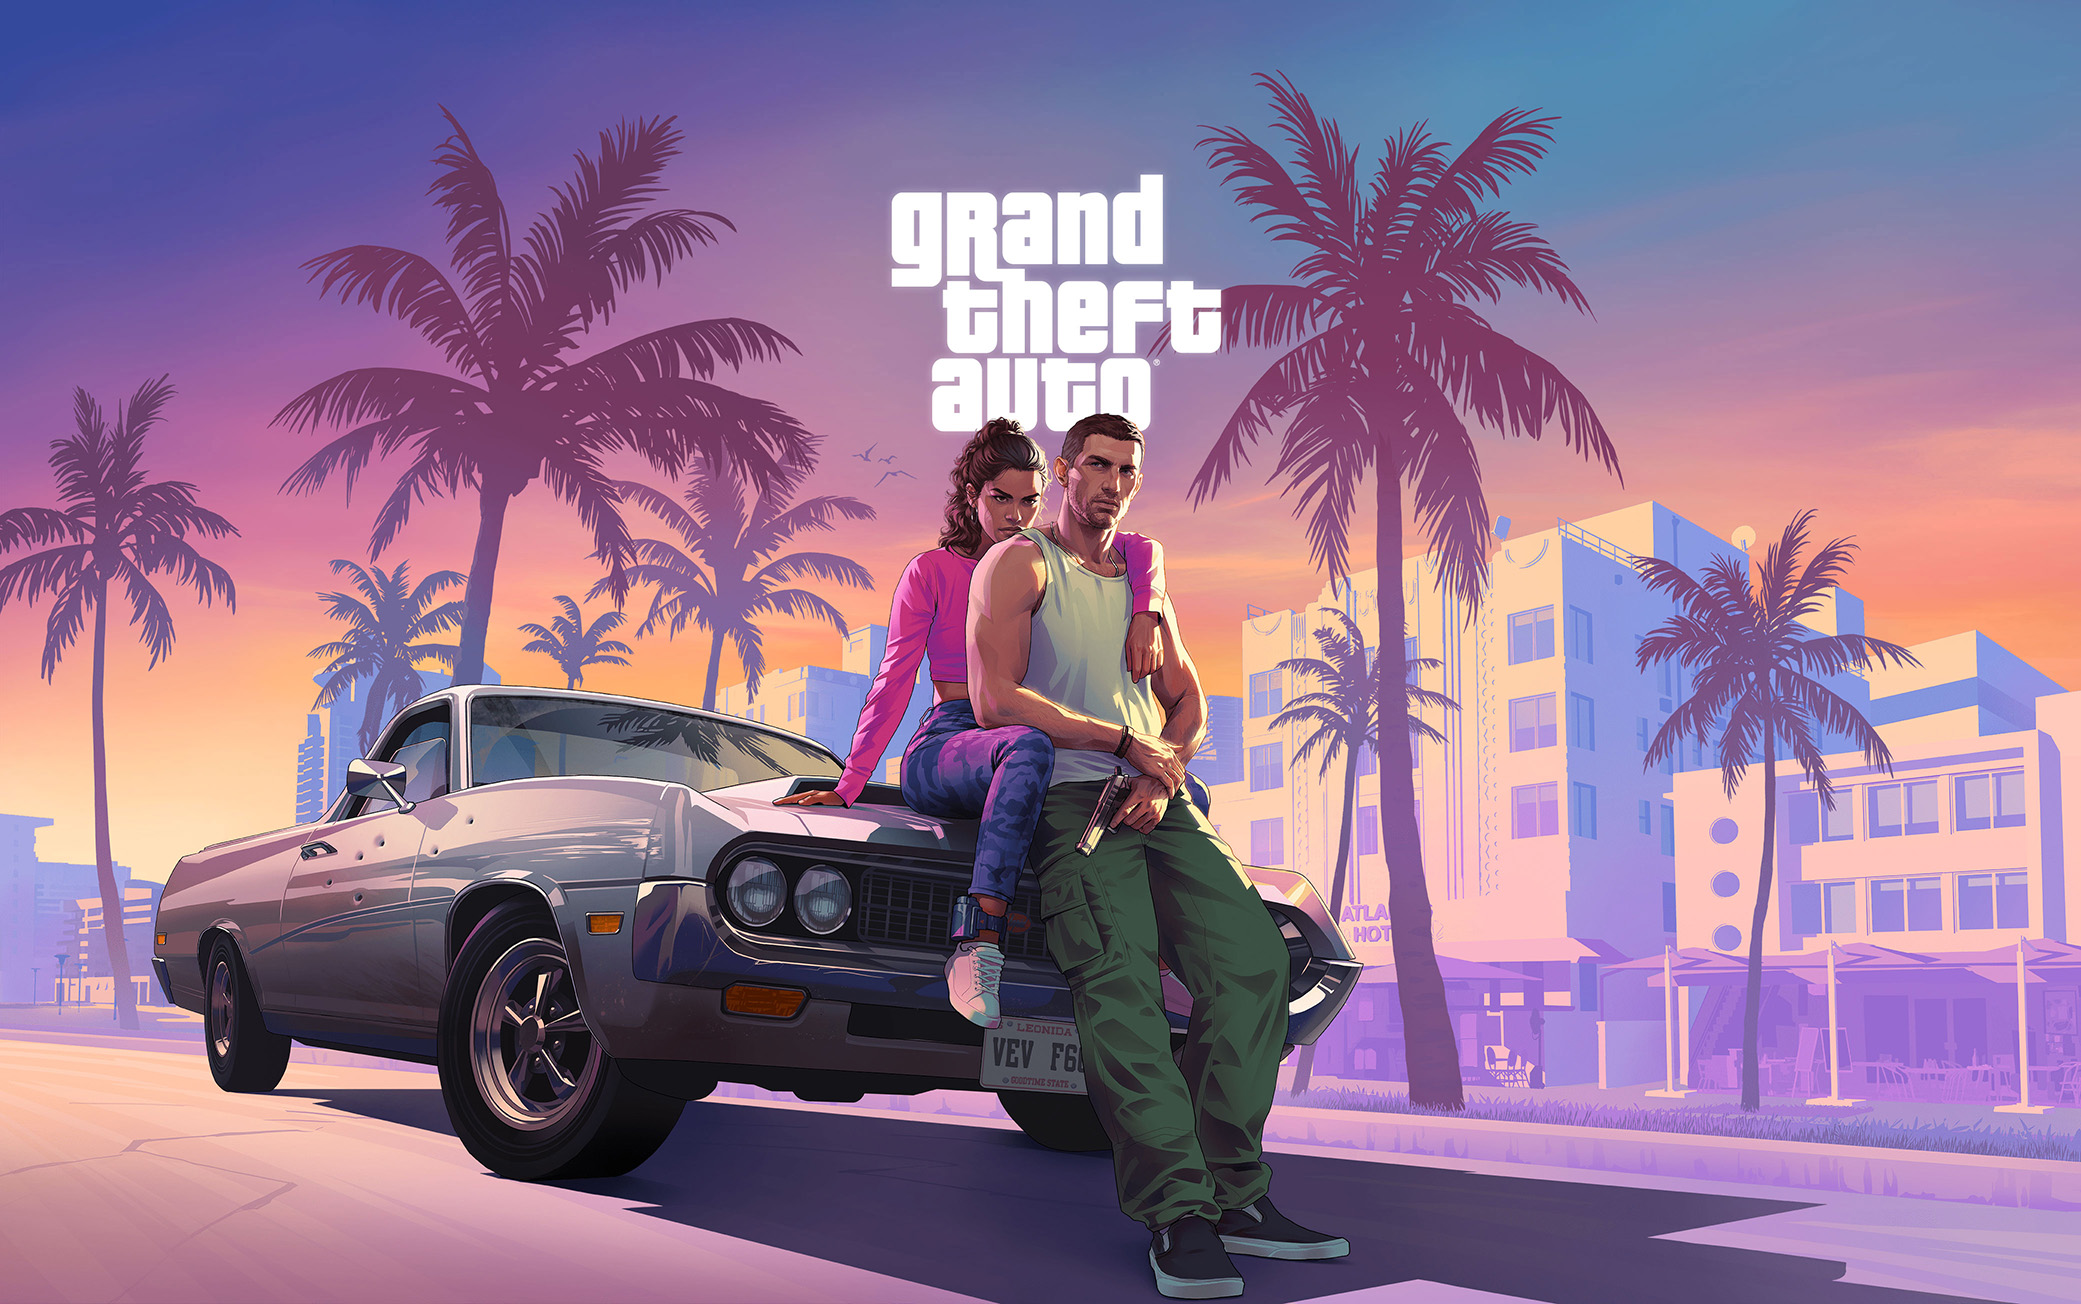 Big Changes at Take-Two: Why GTA VI's Maker is Cutting Jobs and Projects